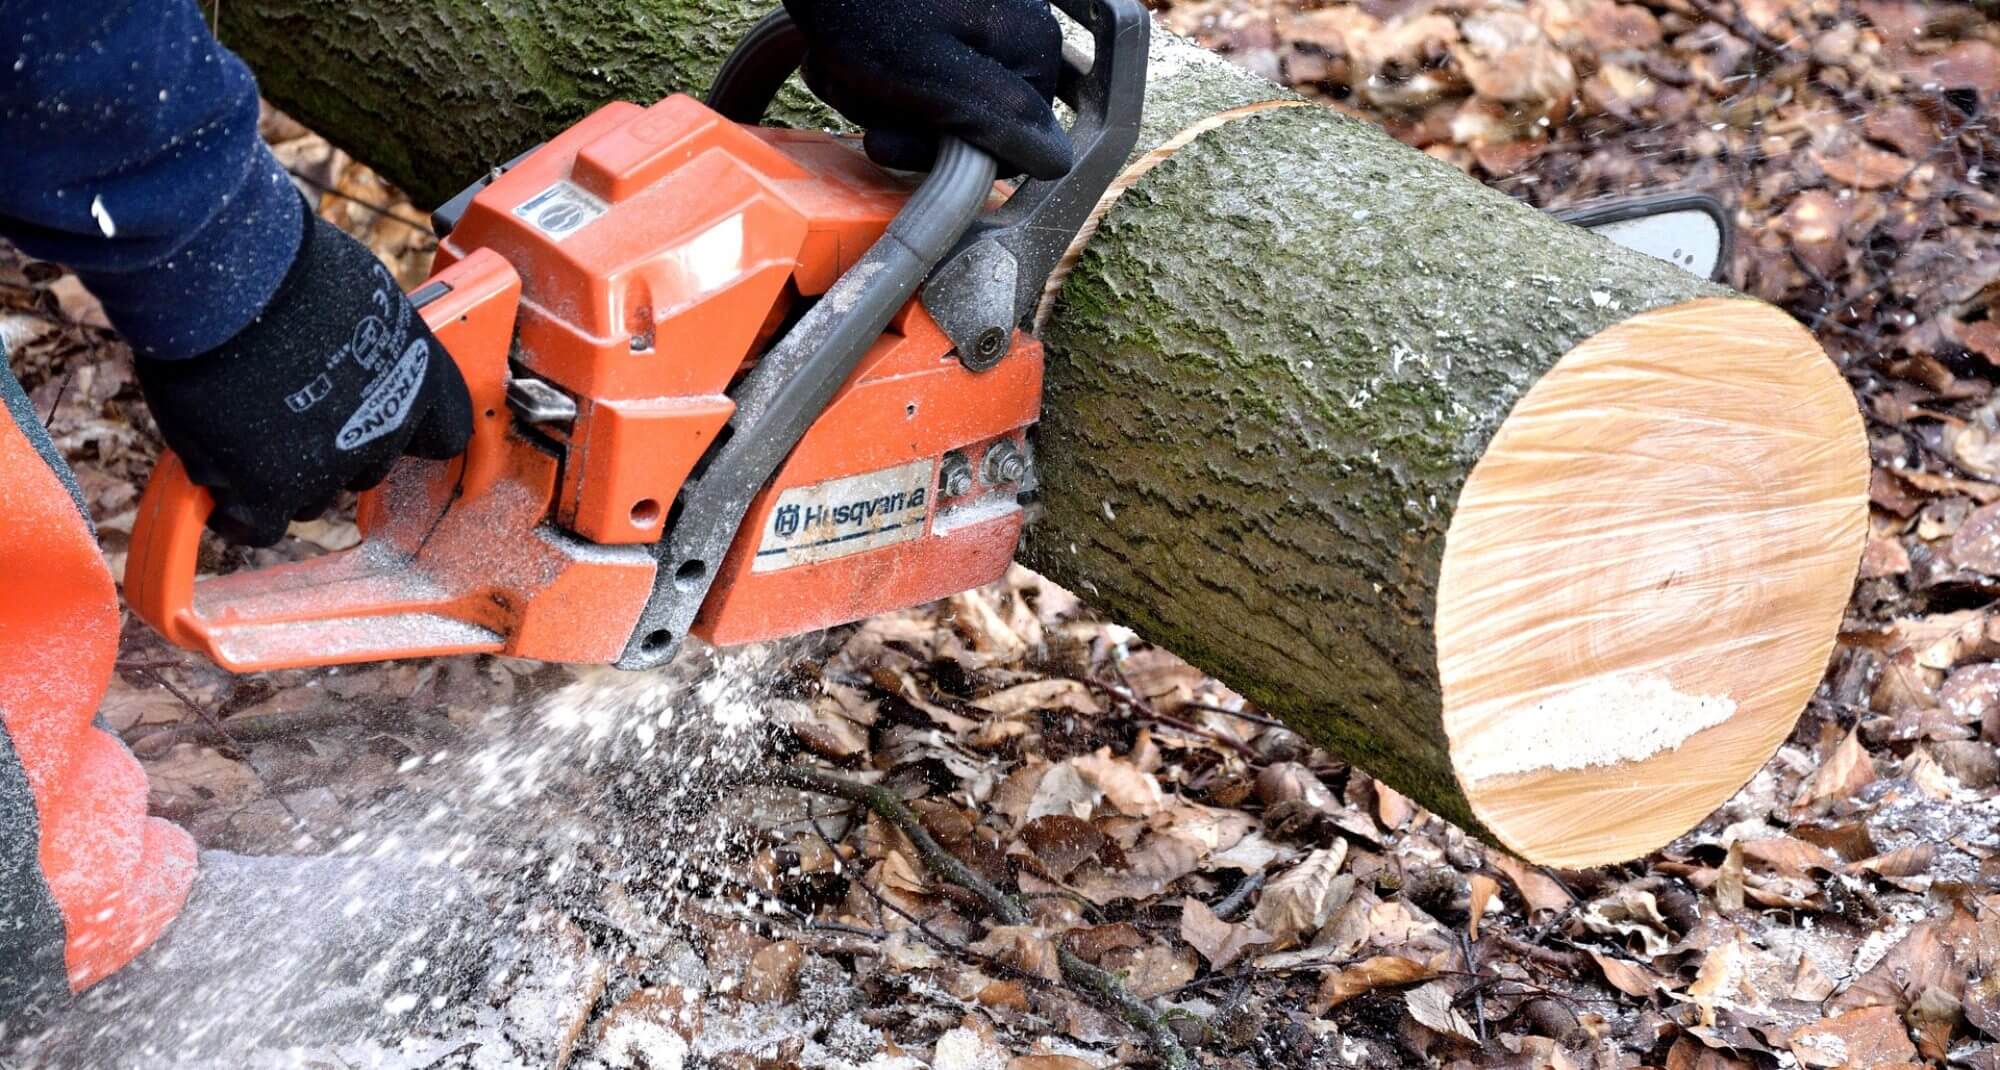 Lake Worth Tree Trimming and Tree Removal Services Main Header-We Offer Tree Trimming Services, Tree Removal, Tree Pruning, Tree Cutting, Residential and Commercial Tree Trimming Services, Storm Damage, Emergency Tree Removal, Land Clearing, Tree Companies, Tree Care Service, Stump Grinding, and we're the Best Tree Trimming Company Near You Guaranteed!